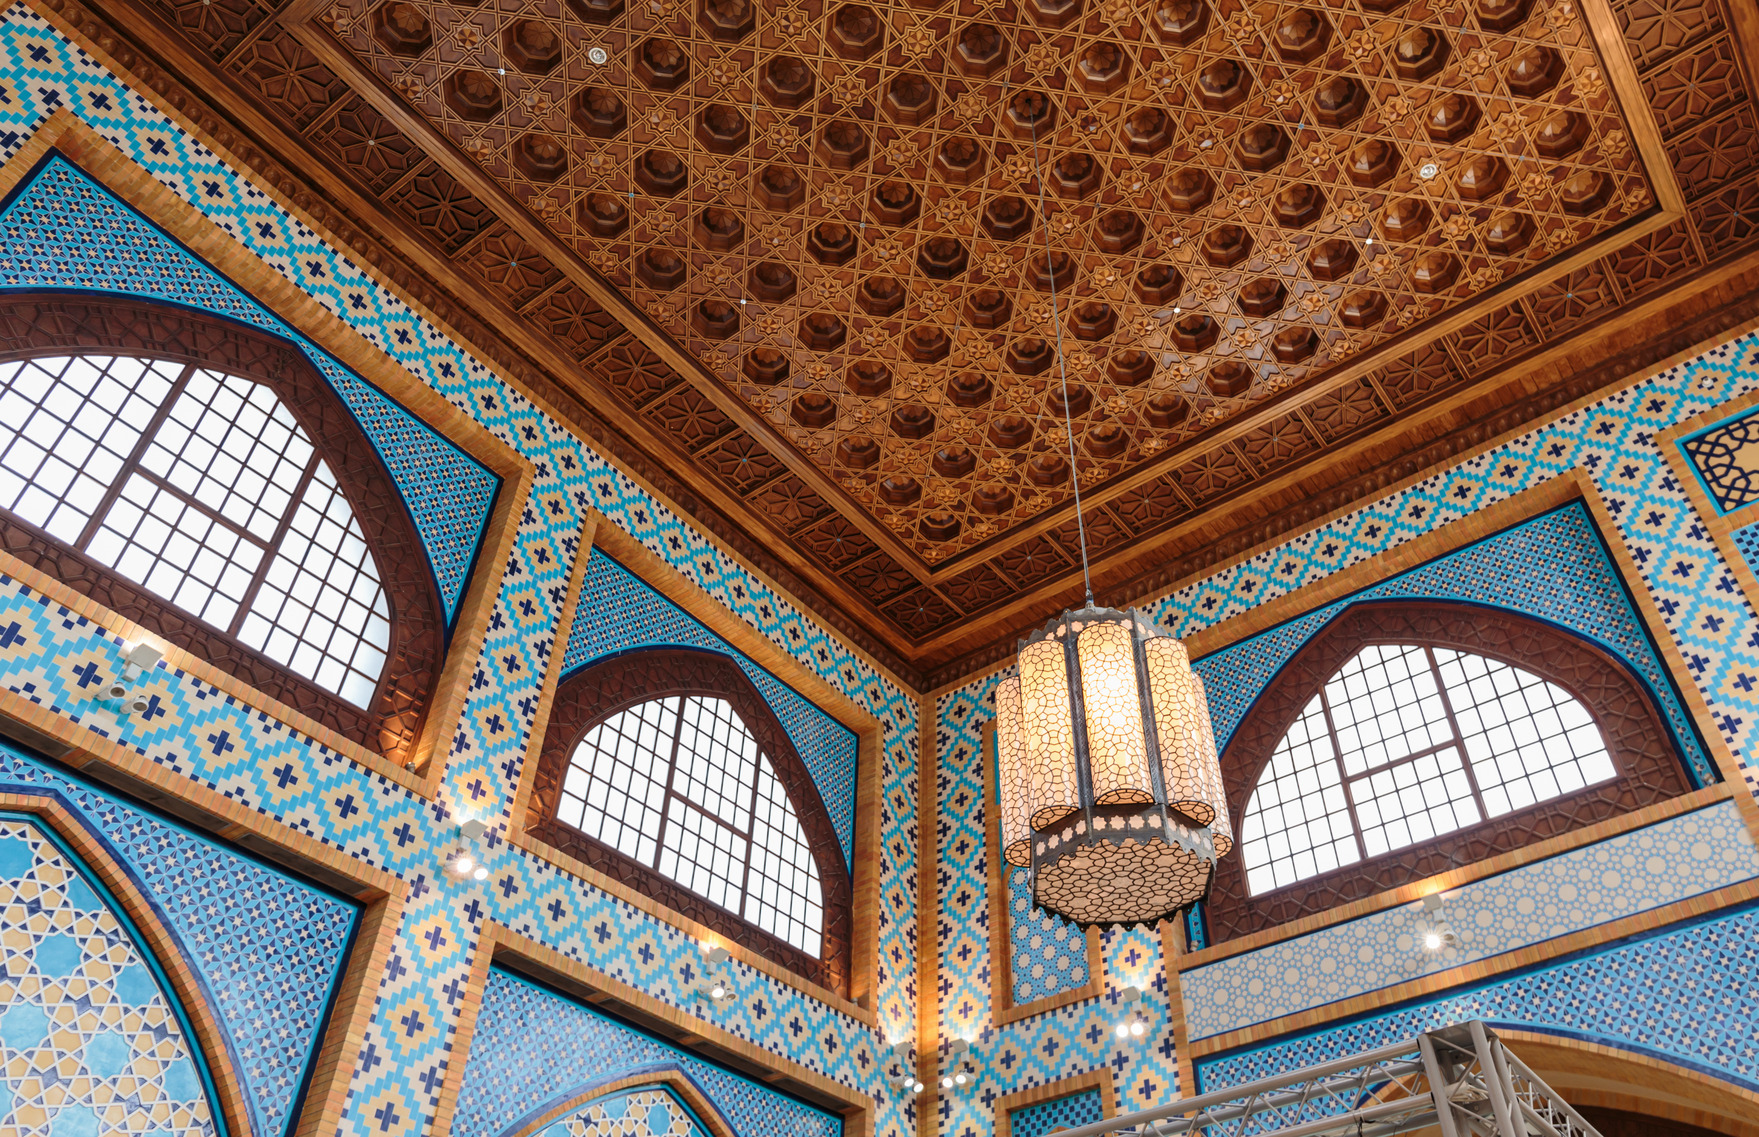 Interior IBN Battuta Mall store. Each hall is decorated in the style of different countries.